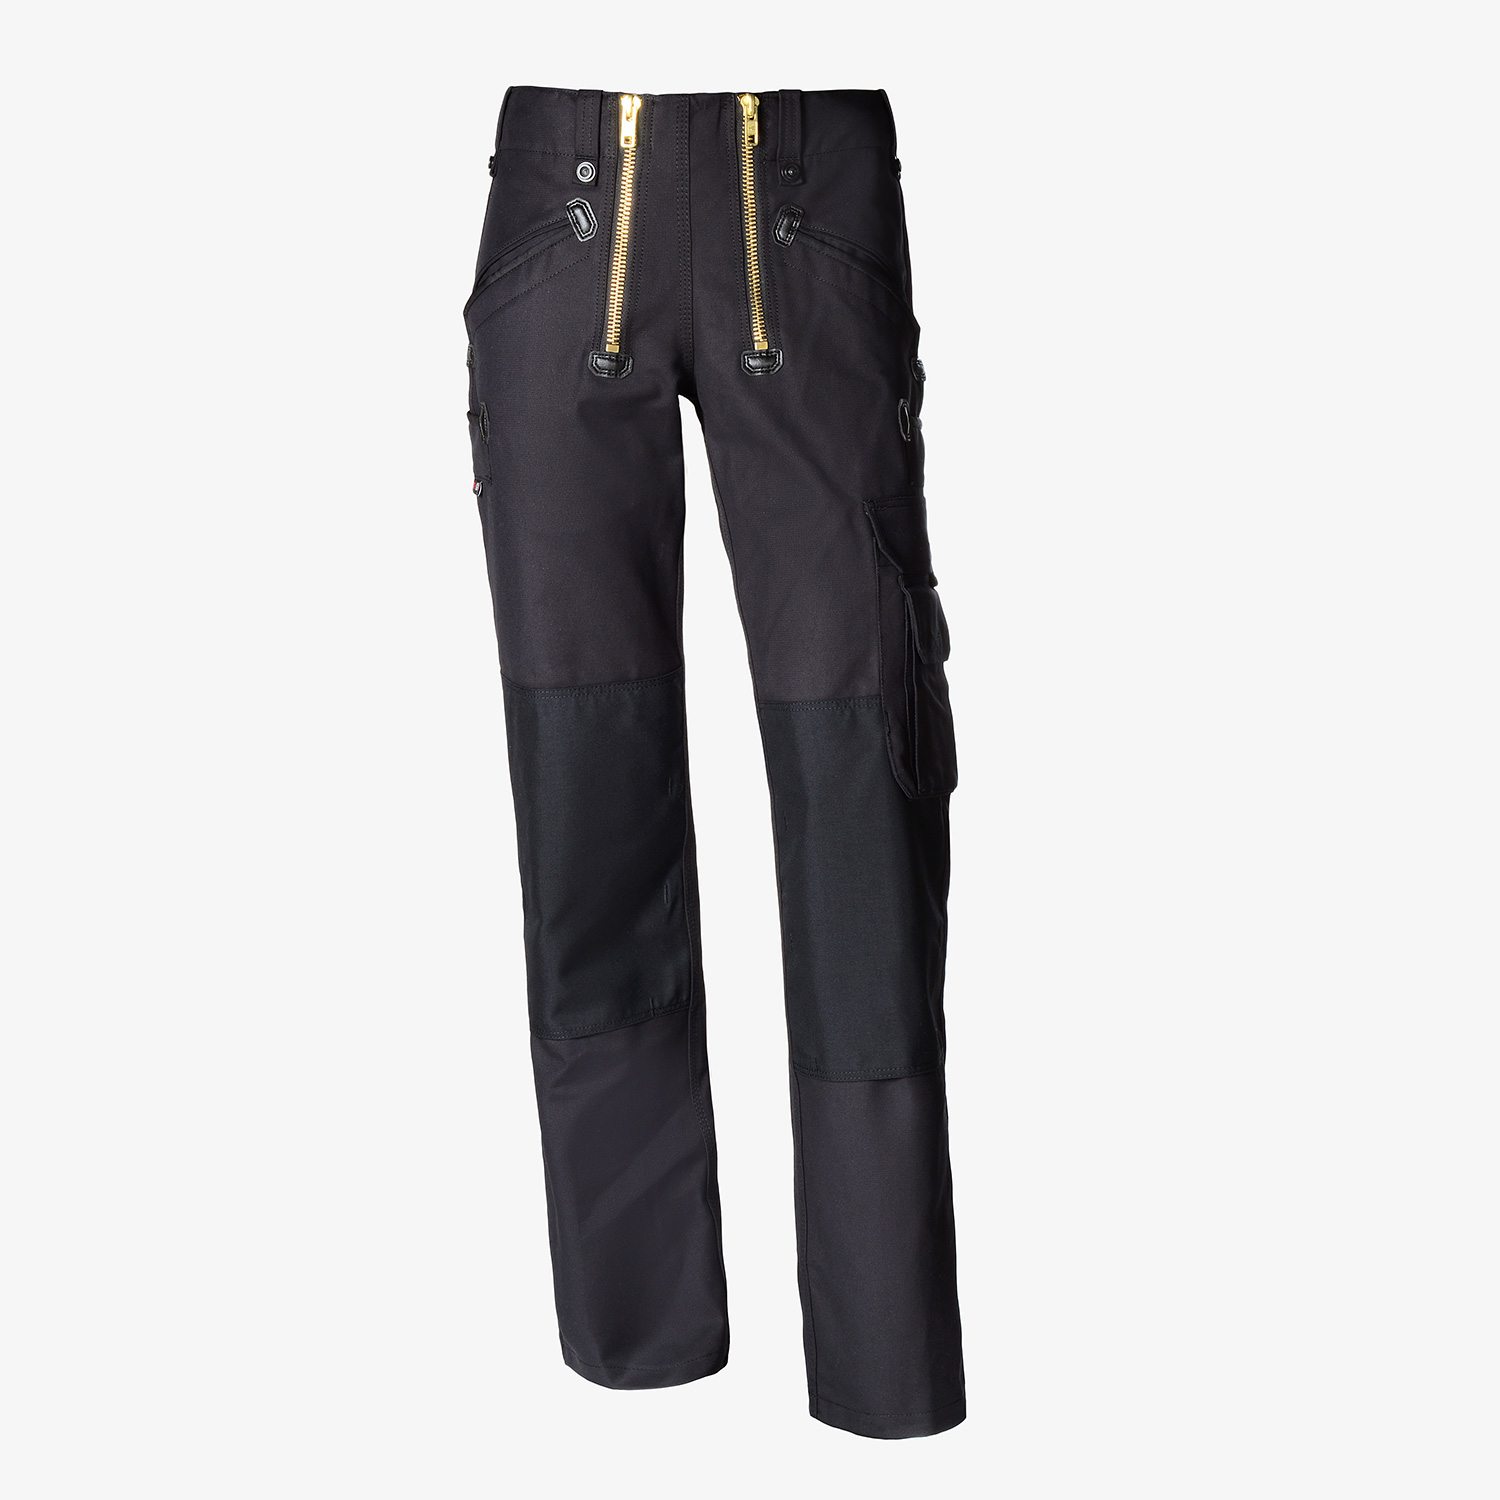 ANDRE guild trousers CORDURA® without bell bottom